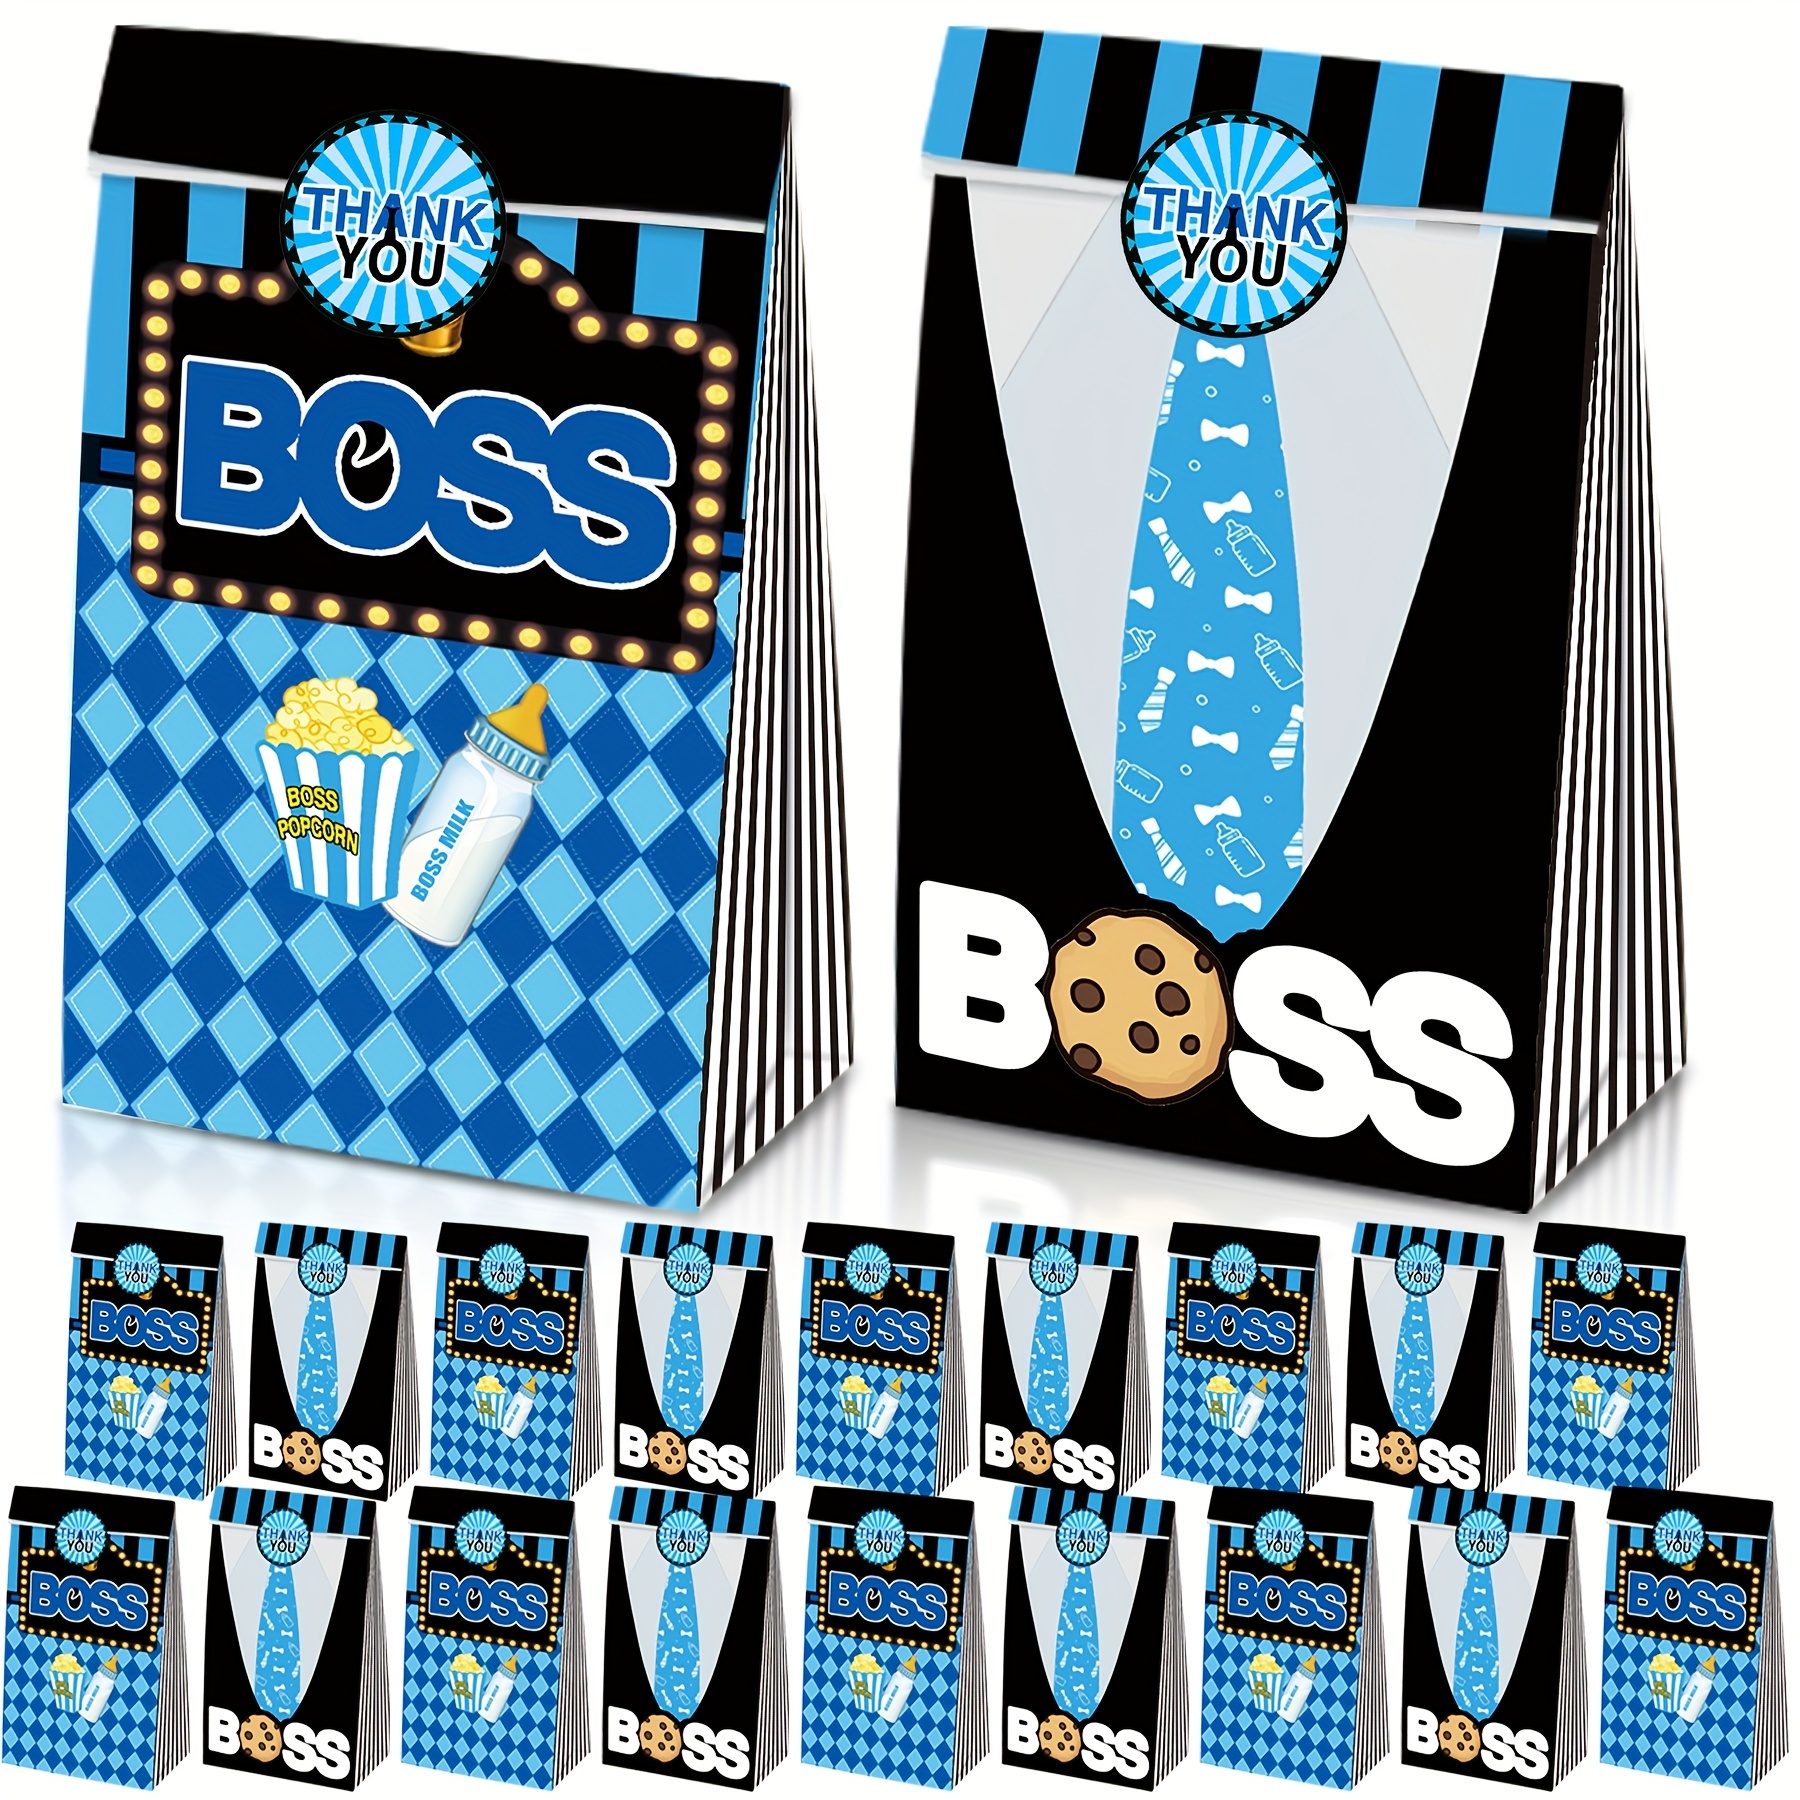 

12pcs/set Baby Boy Boss Party Gift Bags, Goodie Bags, Baby Boss Party Candy Gift Bags For Little Gentleman Birthday Baby Shower, Boss Theme Party Bags Decorations Supplies